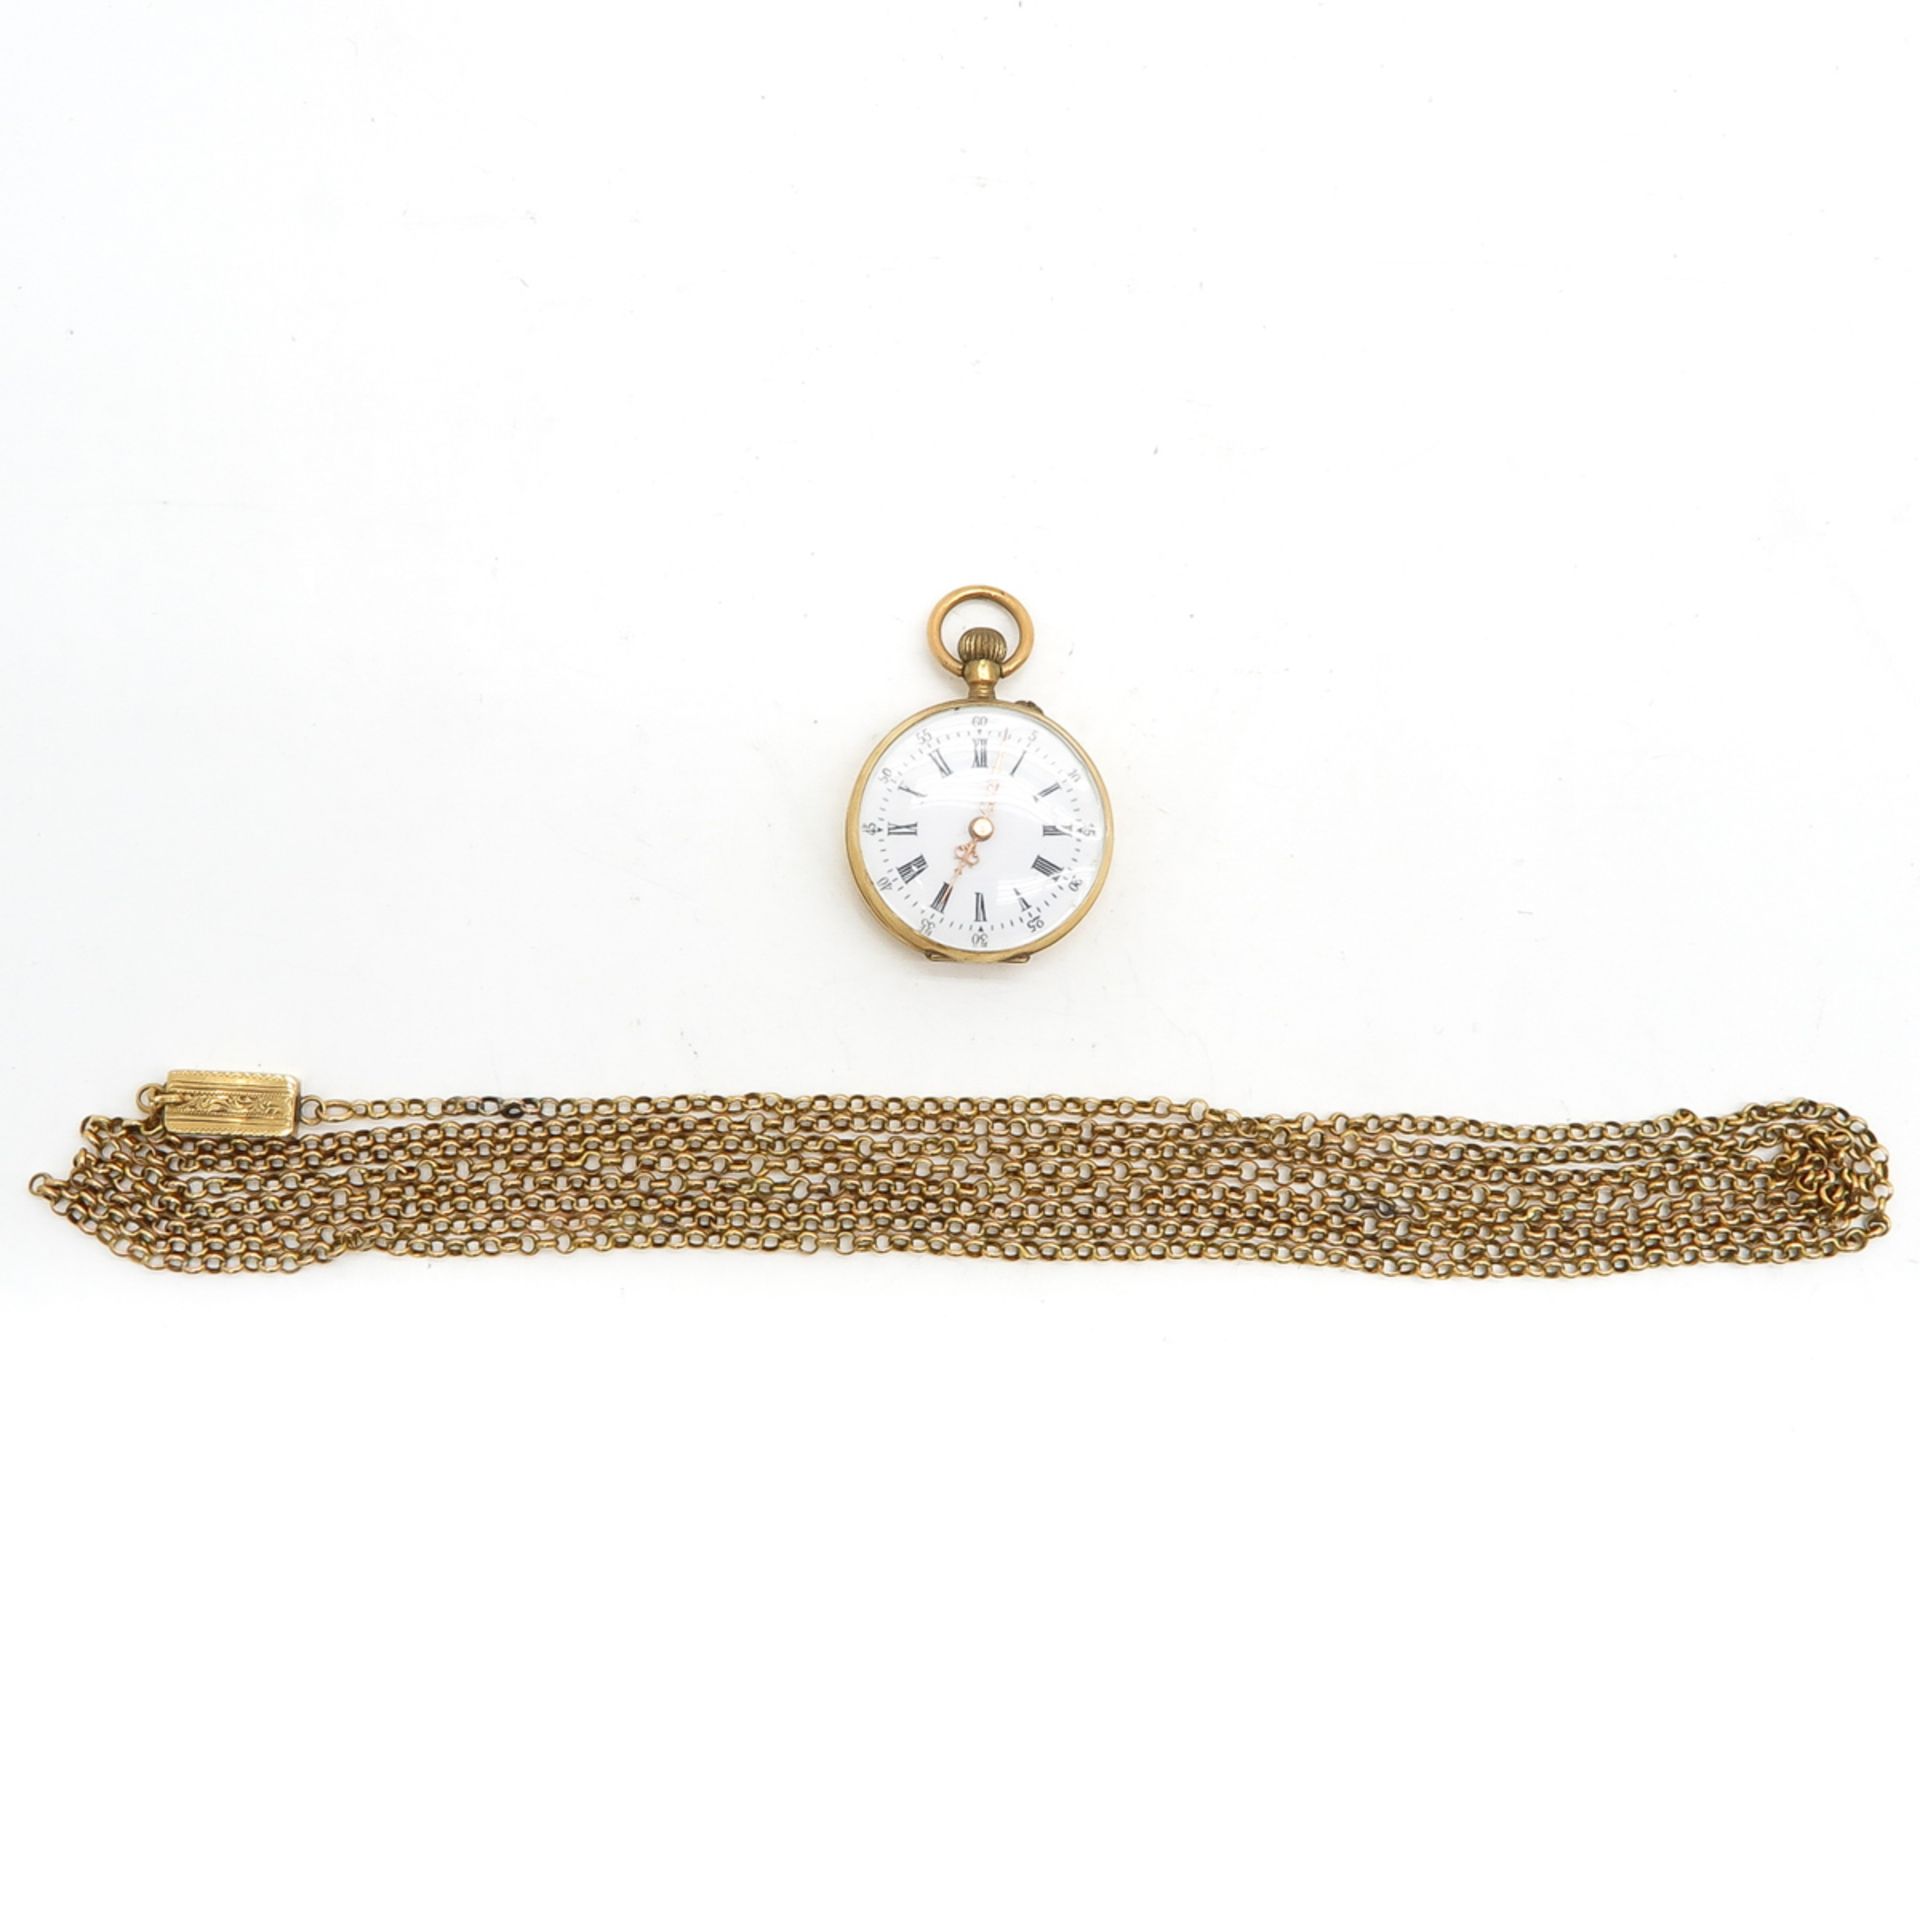 Ladies Pocket Watch and Watch Chain